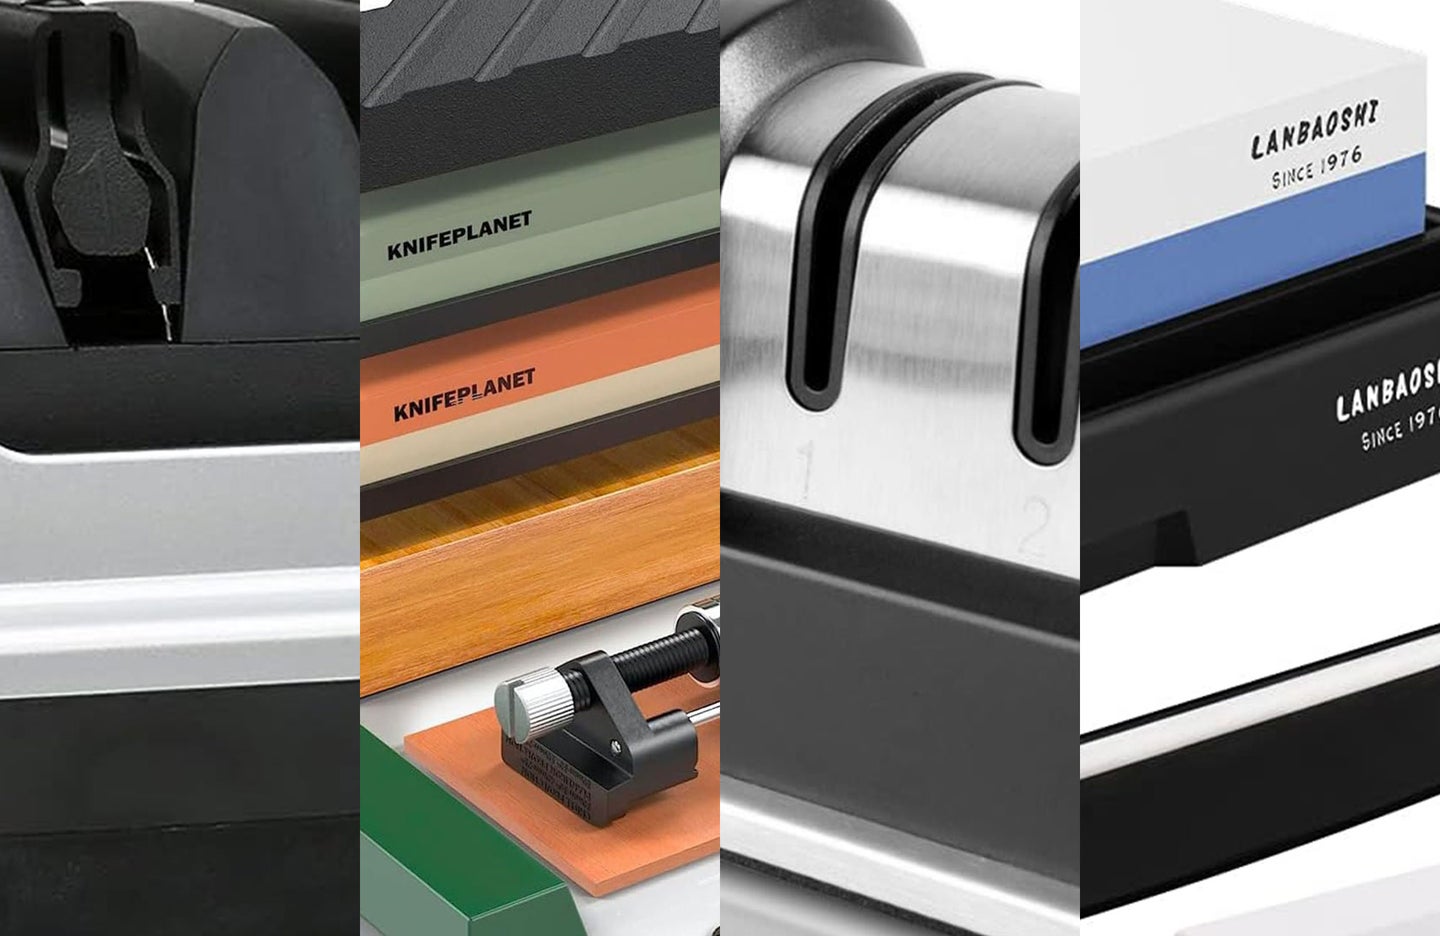 A lineup of the best knife sharpeners on a plain background